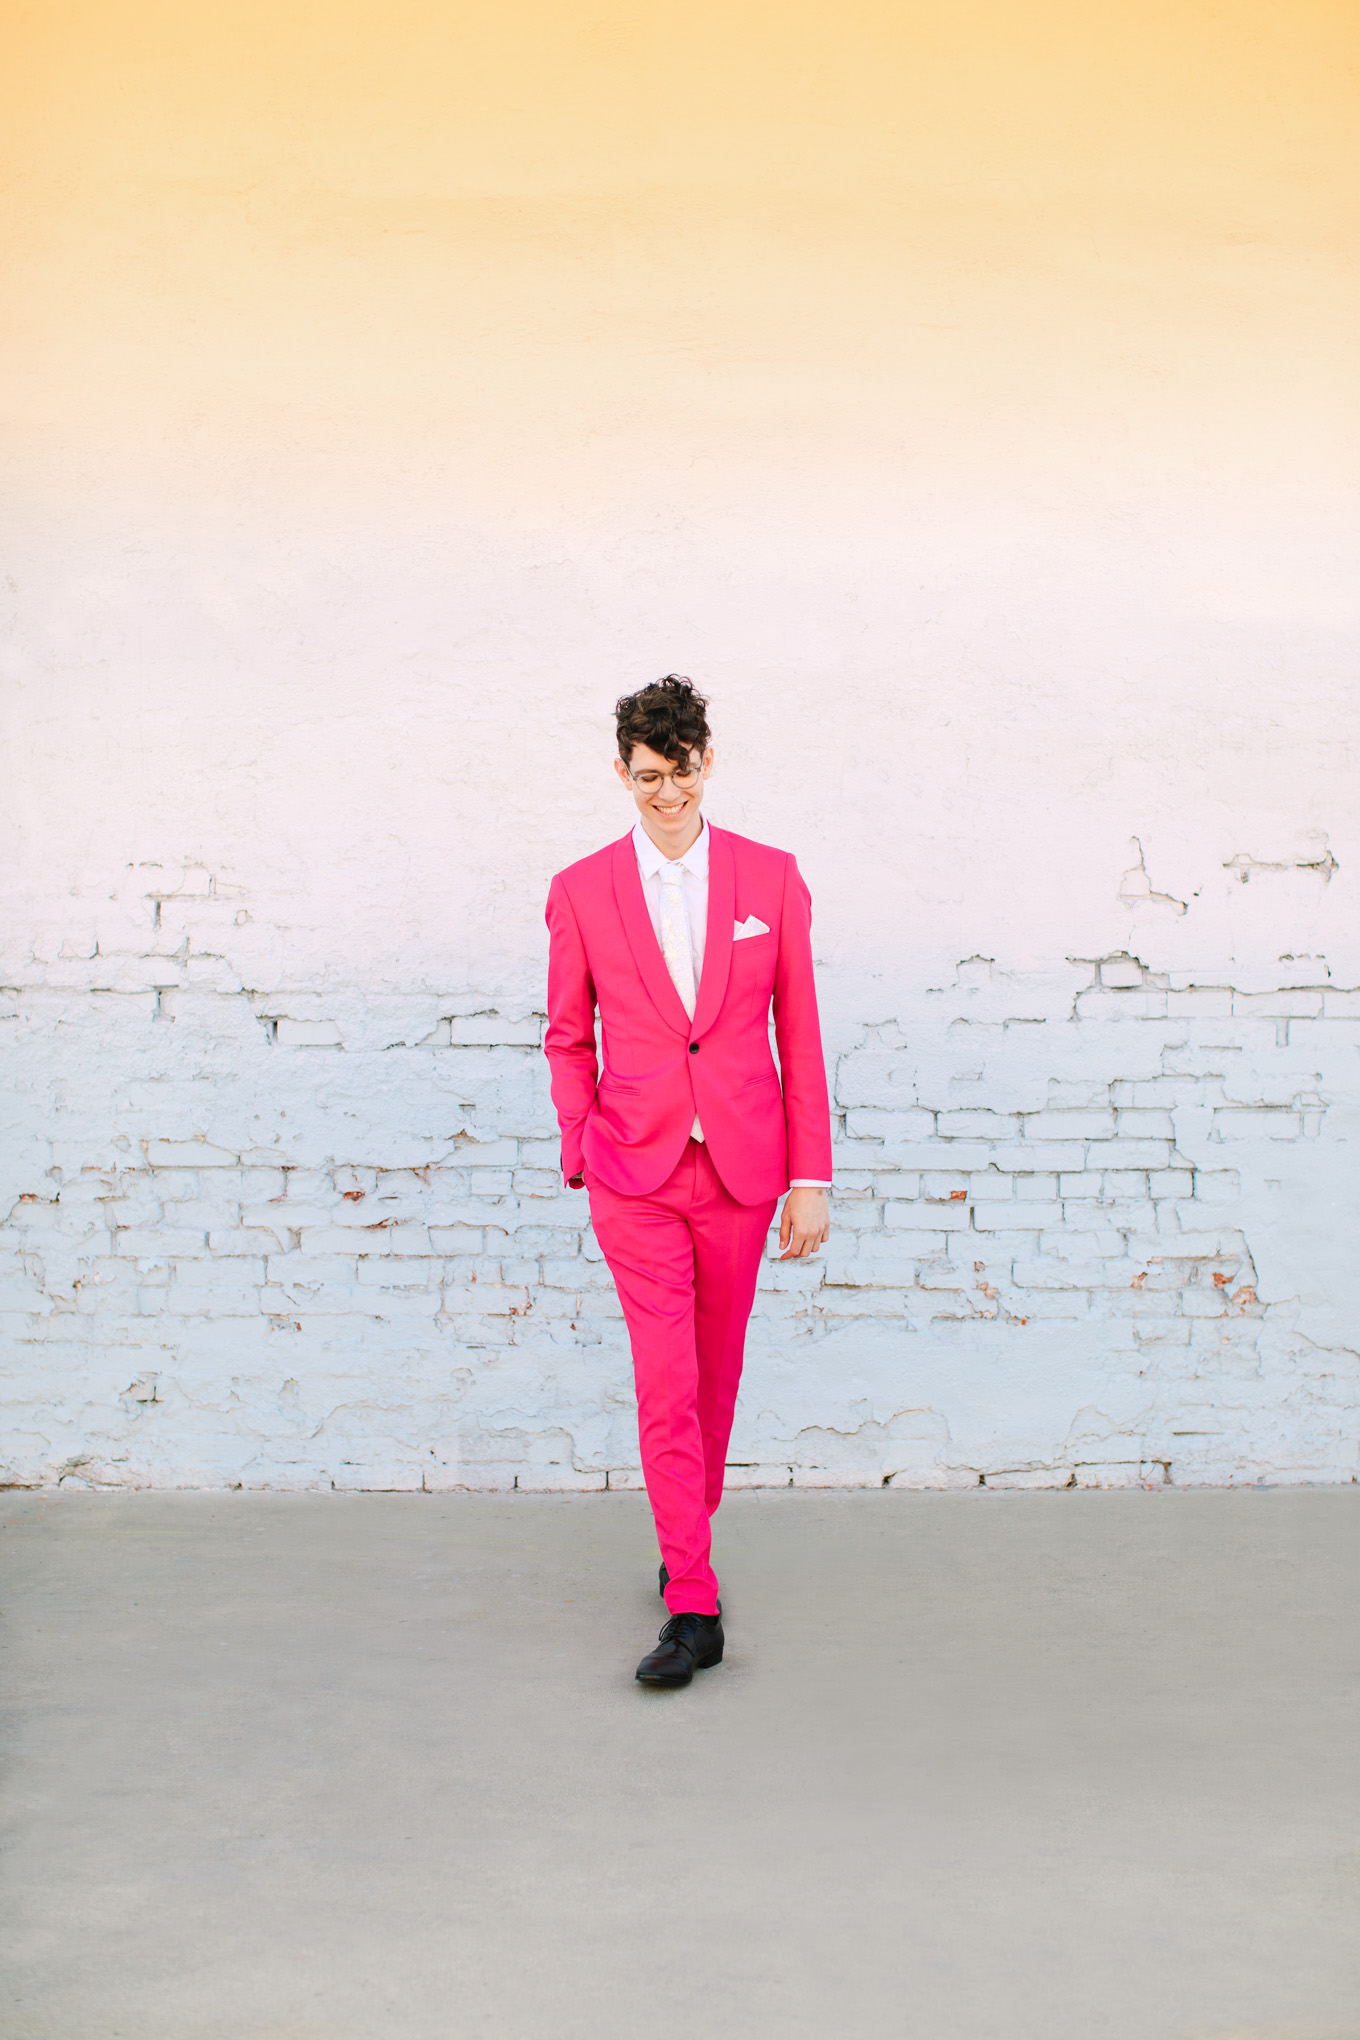 Groom walking in hot pink suit | Colorful wedding at The Unique Space Los Angeles published in The Knot Magazine | Fresh and colorful photography for fun-loving couples in Southern California | #colorfulwedding #losangeleswedding #weddingphotography #uniquespace Source: Mary Costa Photography | Los Angeles